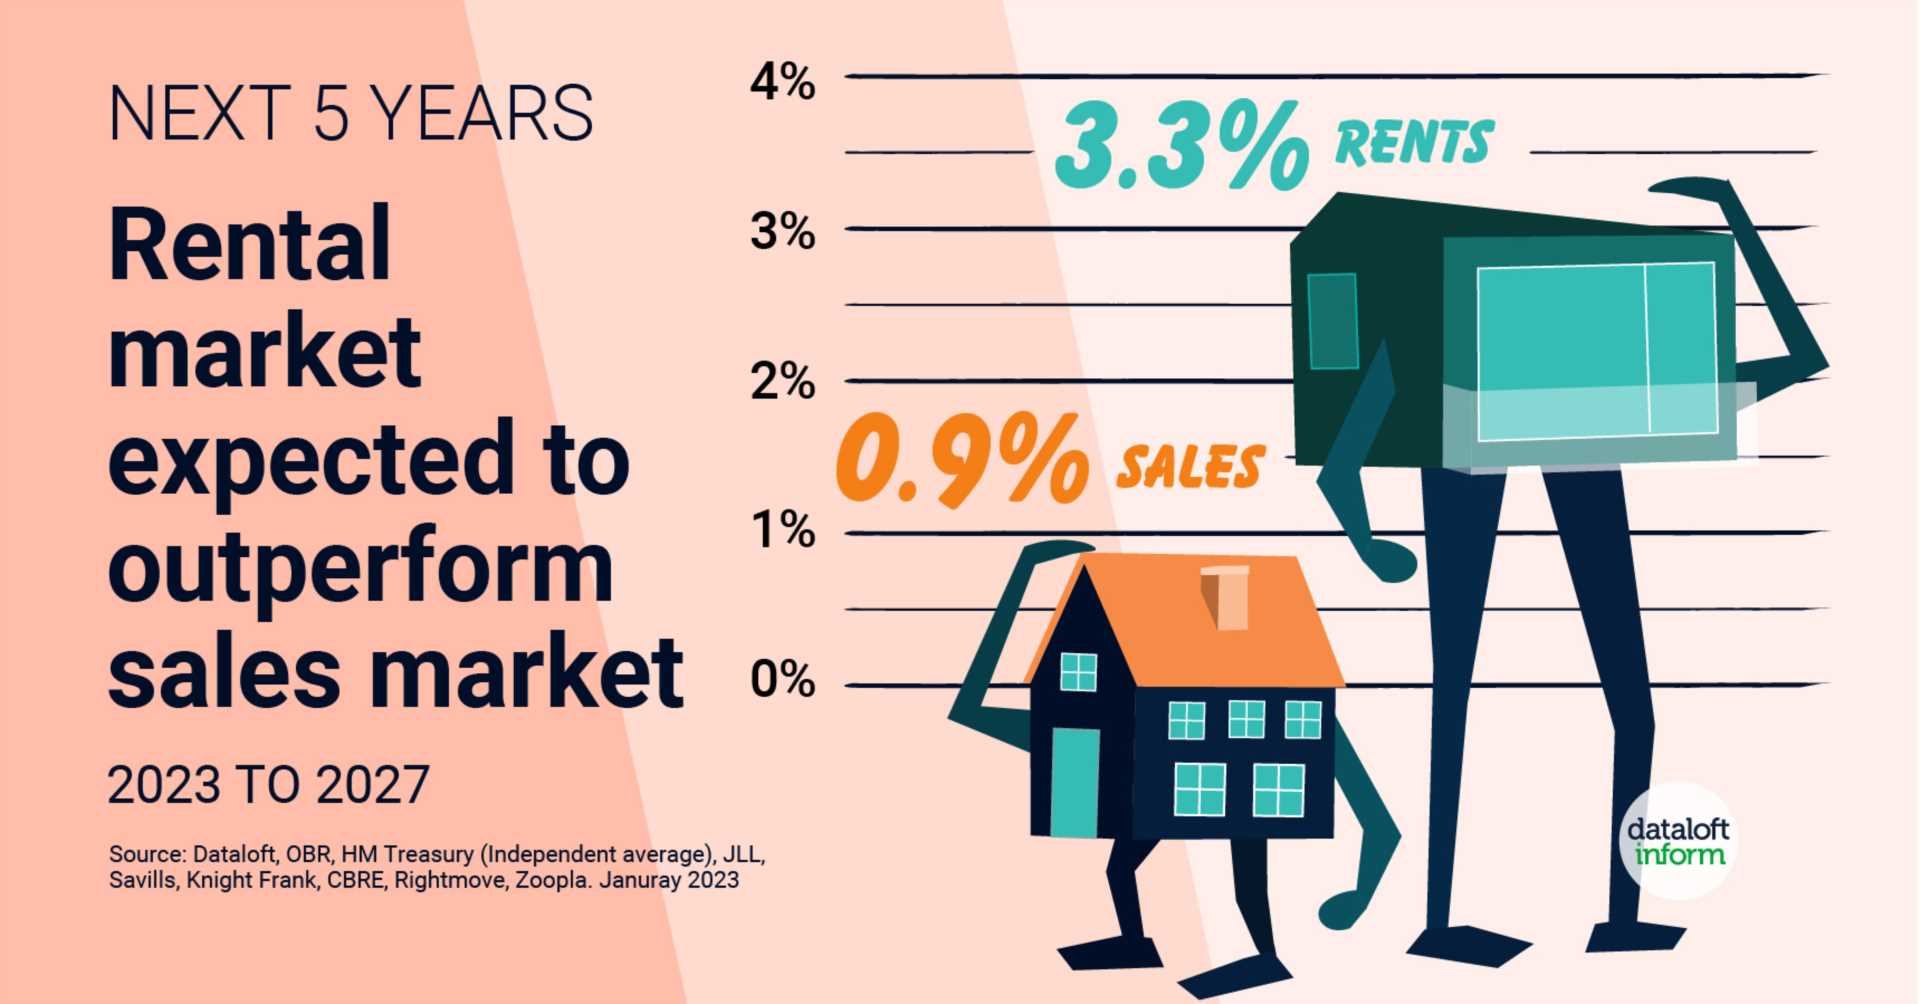 Rental market expected outperform sales market over next 5 years